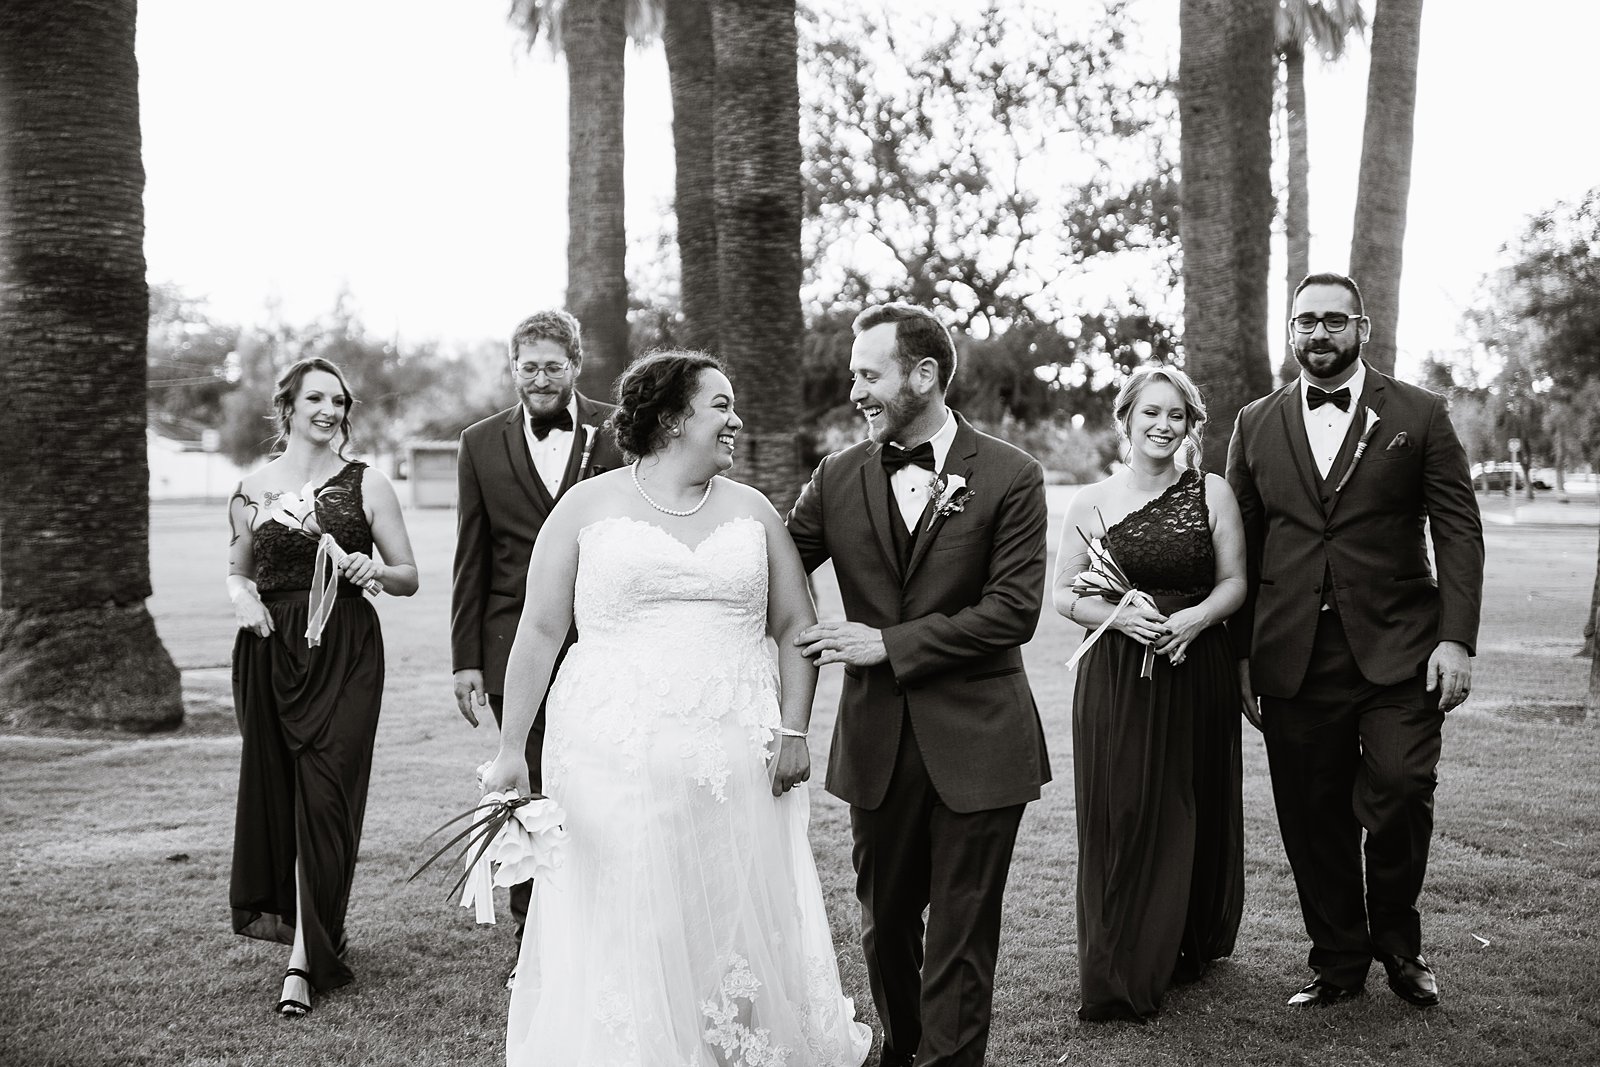 Bridal party laughing together at Encanto Park wedding by Phoenix wedding photographer PMA Photography.